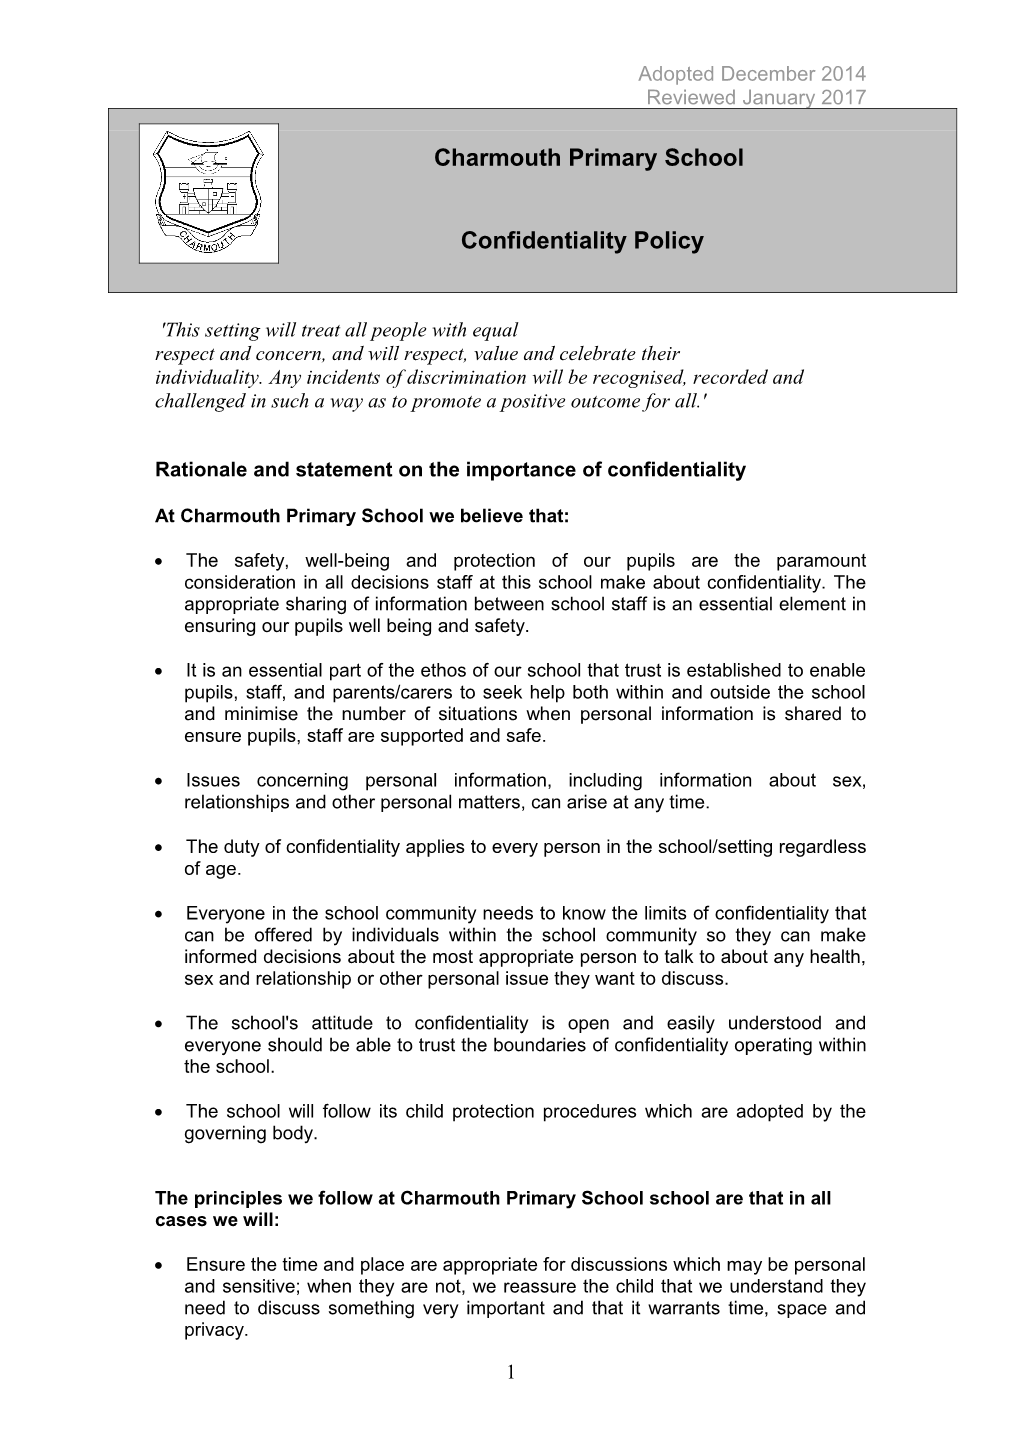 Rationale and Statement on the Importance of Confidentiality